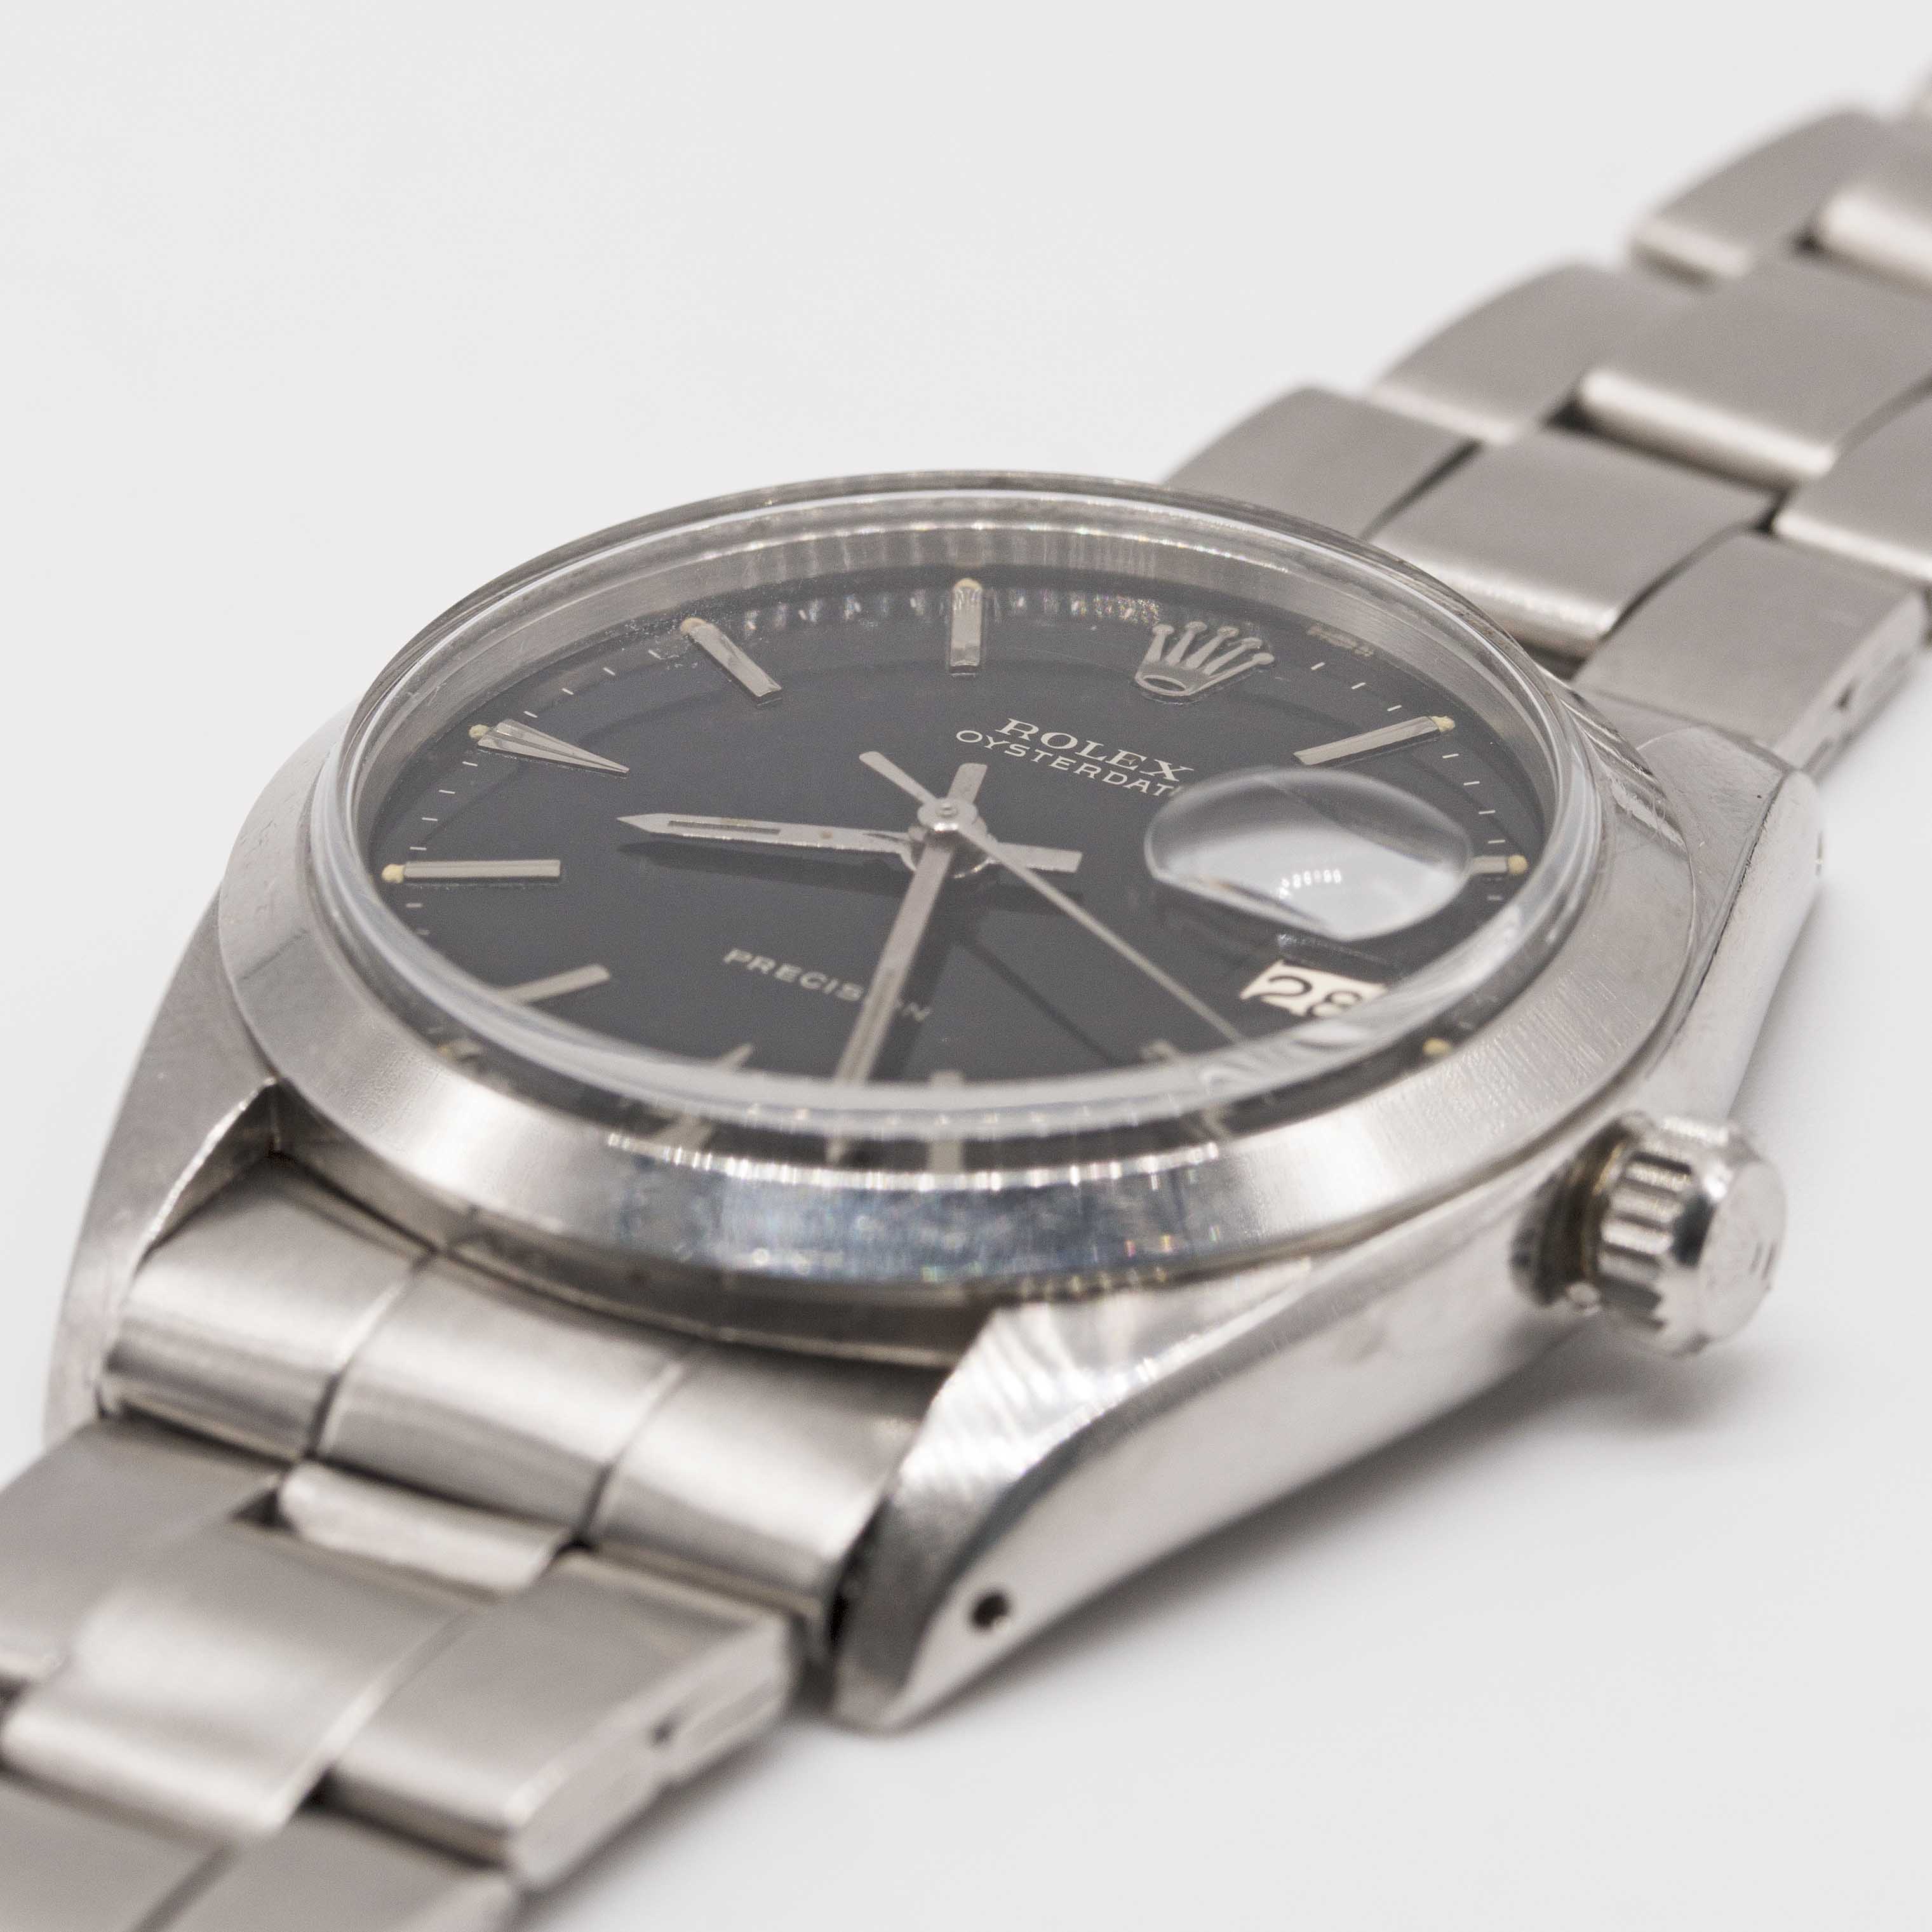 A GENTLEMAN'S STAINLESS STEEL ROLEX OYSTERDATE PRECISION BRACELET WATCH CIRCA 1966, REF. 6694 WITH - Image 3 of 10